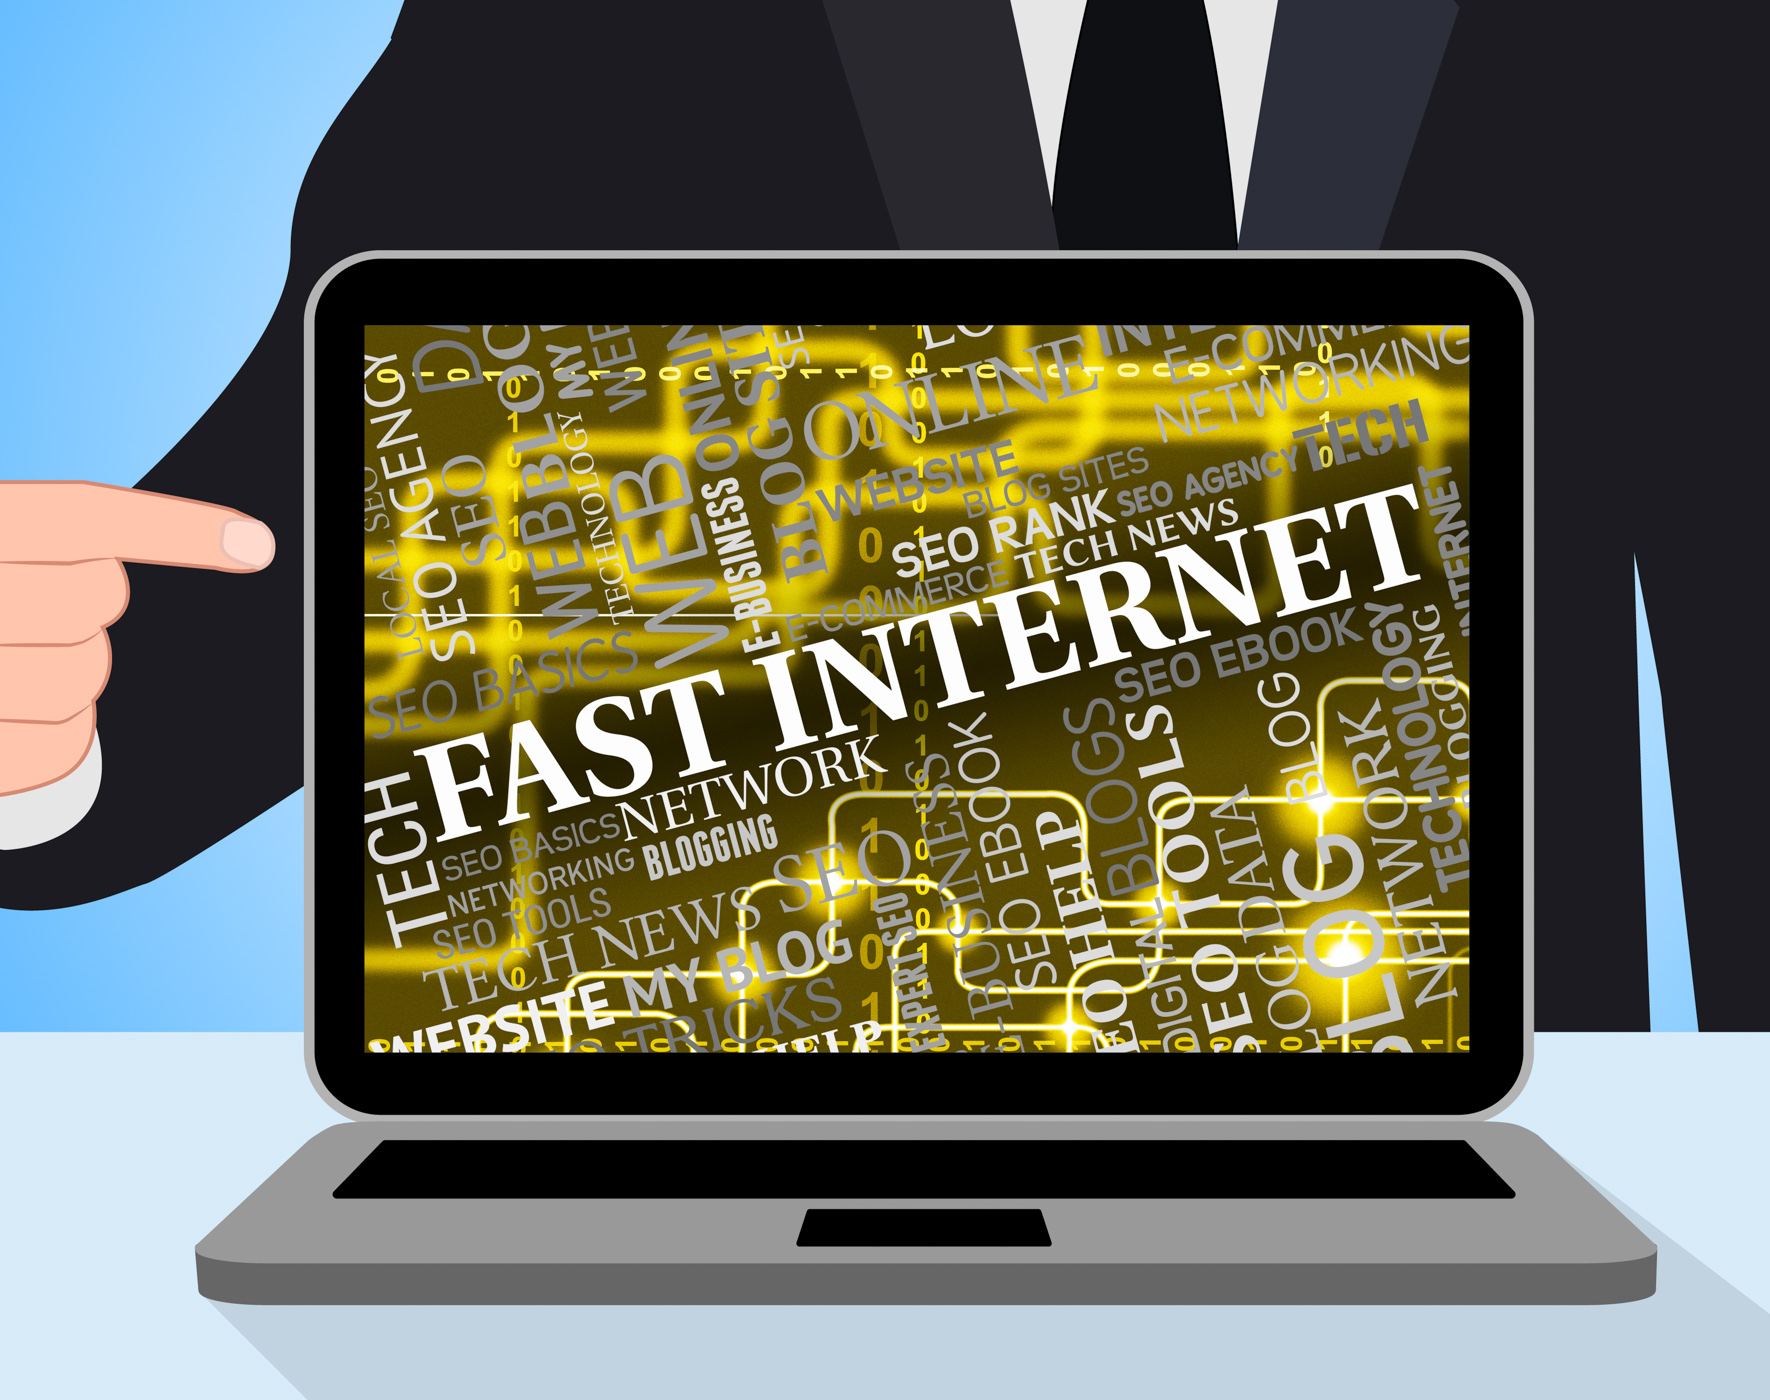 Fast internet represents high speed and computer photo